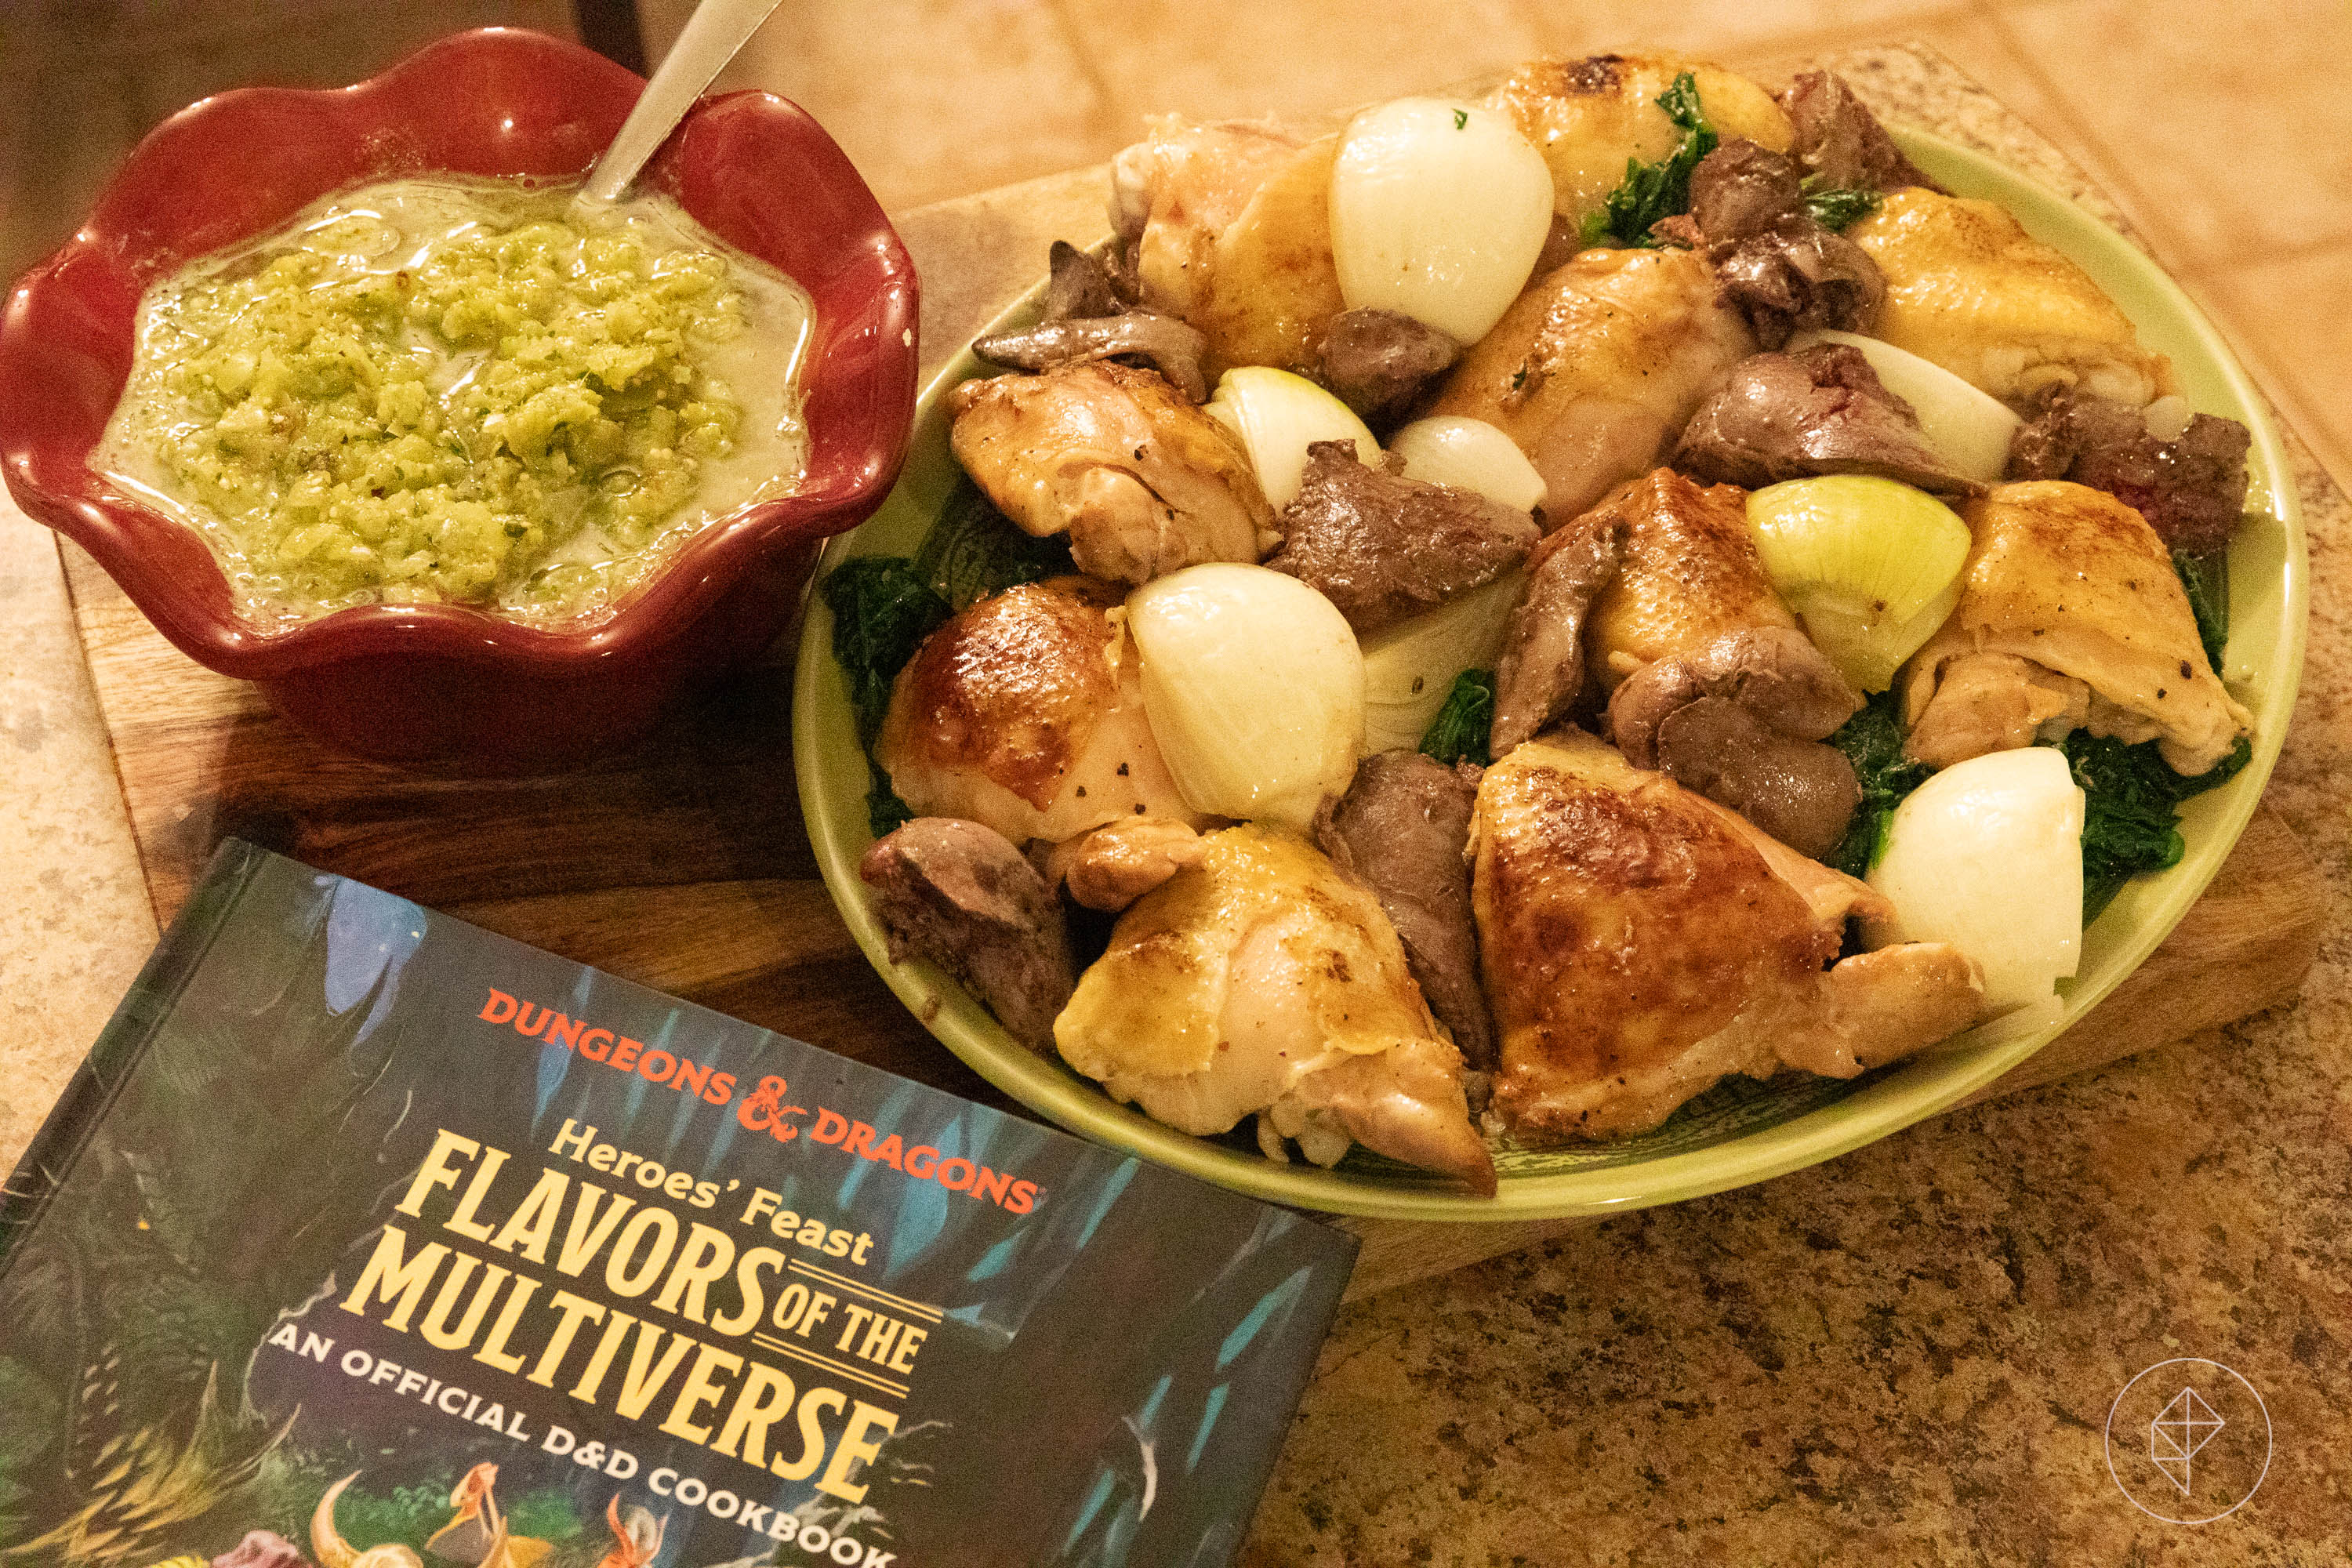 Bits of chicken and roast onion sitting on a green dinner plate, next to a tomatillo salsa in a red bowl.